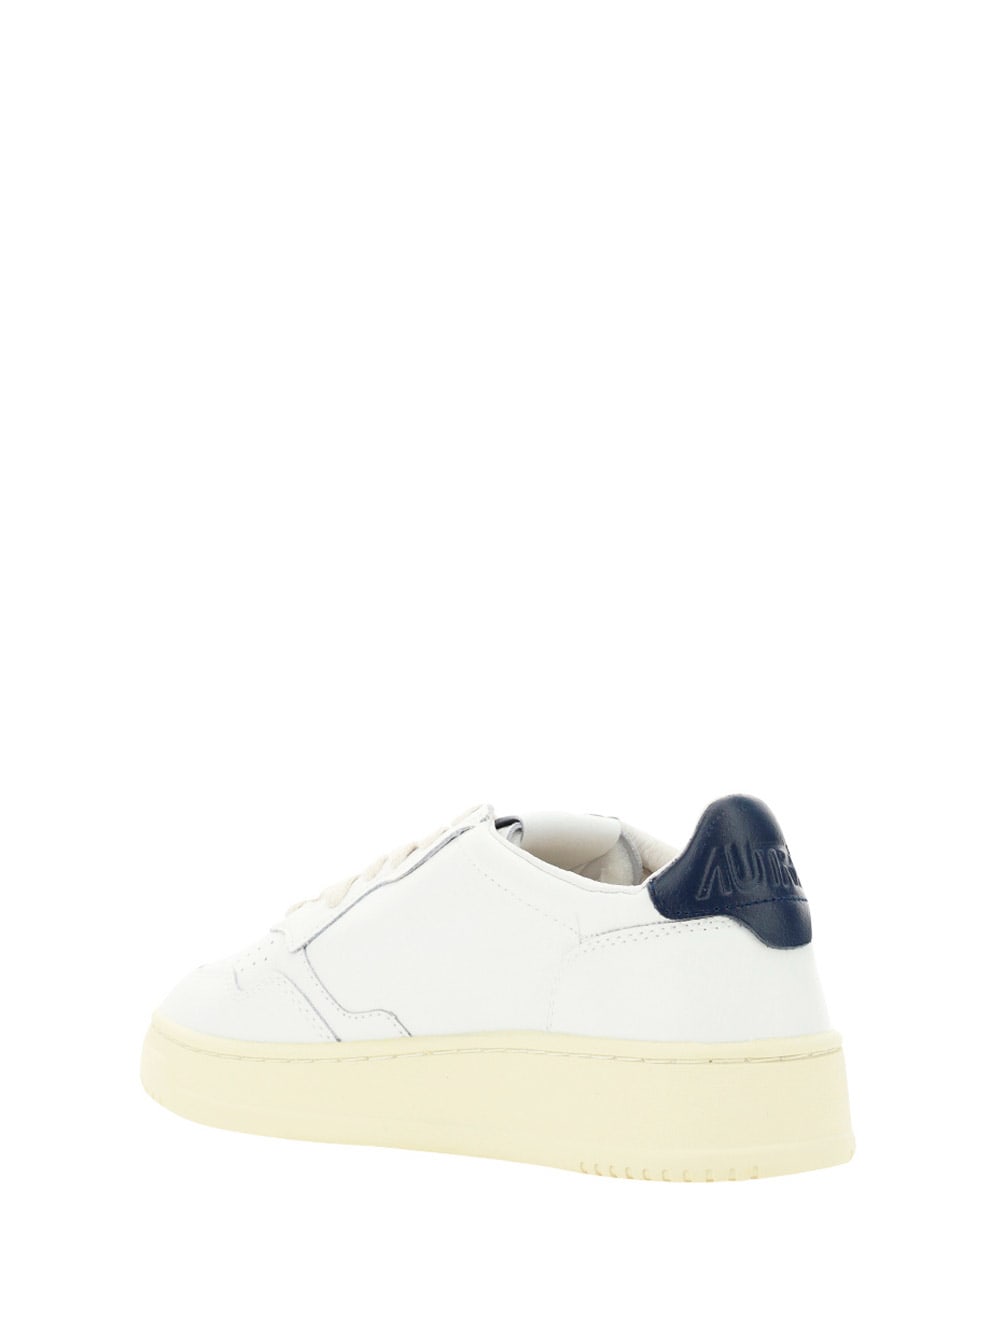 Shop Autry White Space Sneakers From In Wht/space